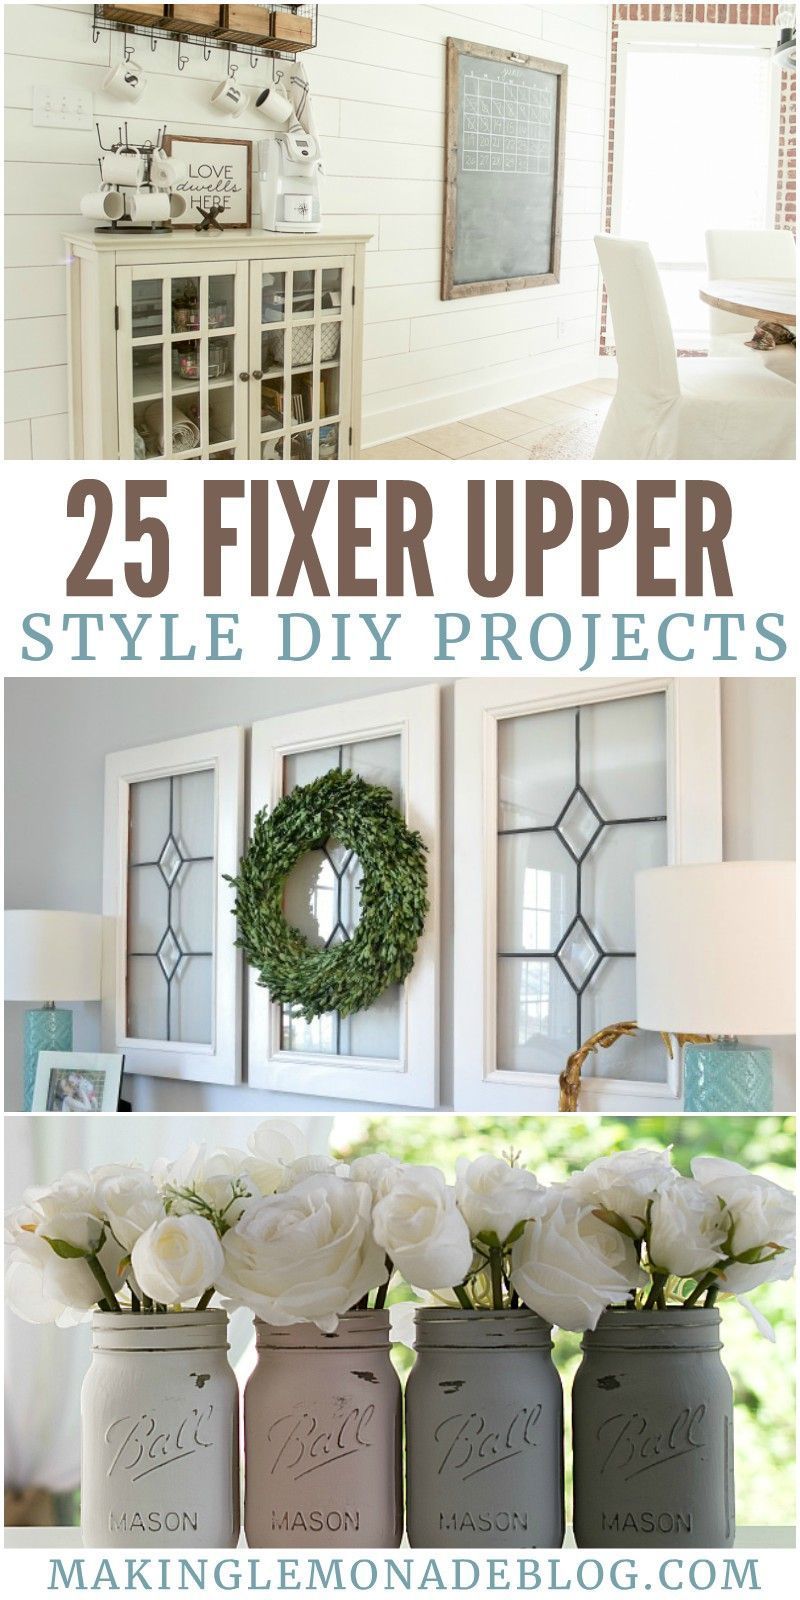 25 Fixer Upper Style DIY Projects - 25 Fixer Upper Style DIY Projects -   16 farmhouse wall decorations joanna gaines ideas